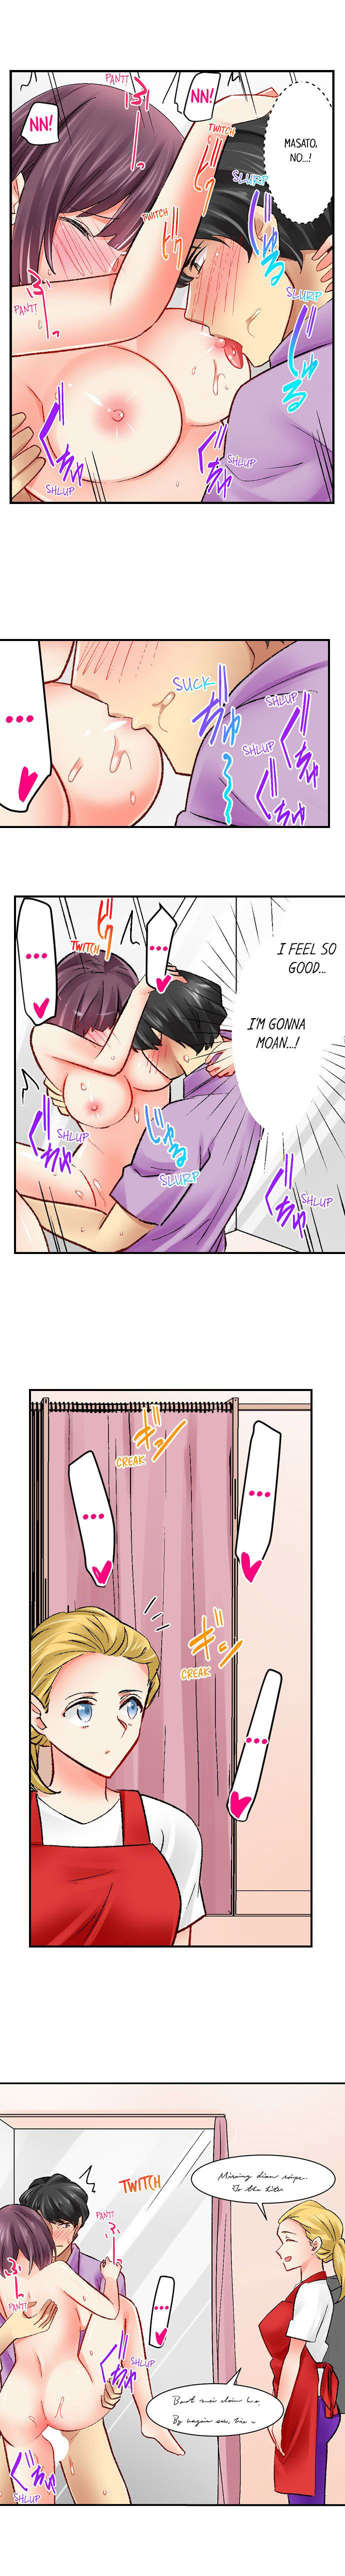 Our Kinky Newlywed Life - Chapter 51 Page 4